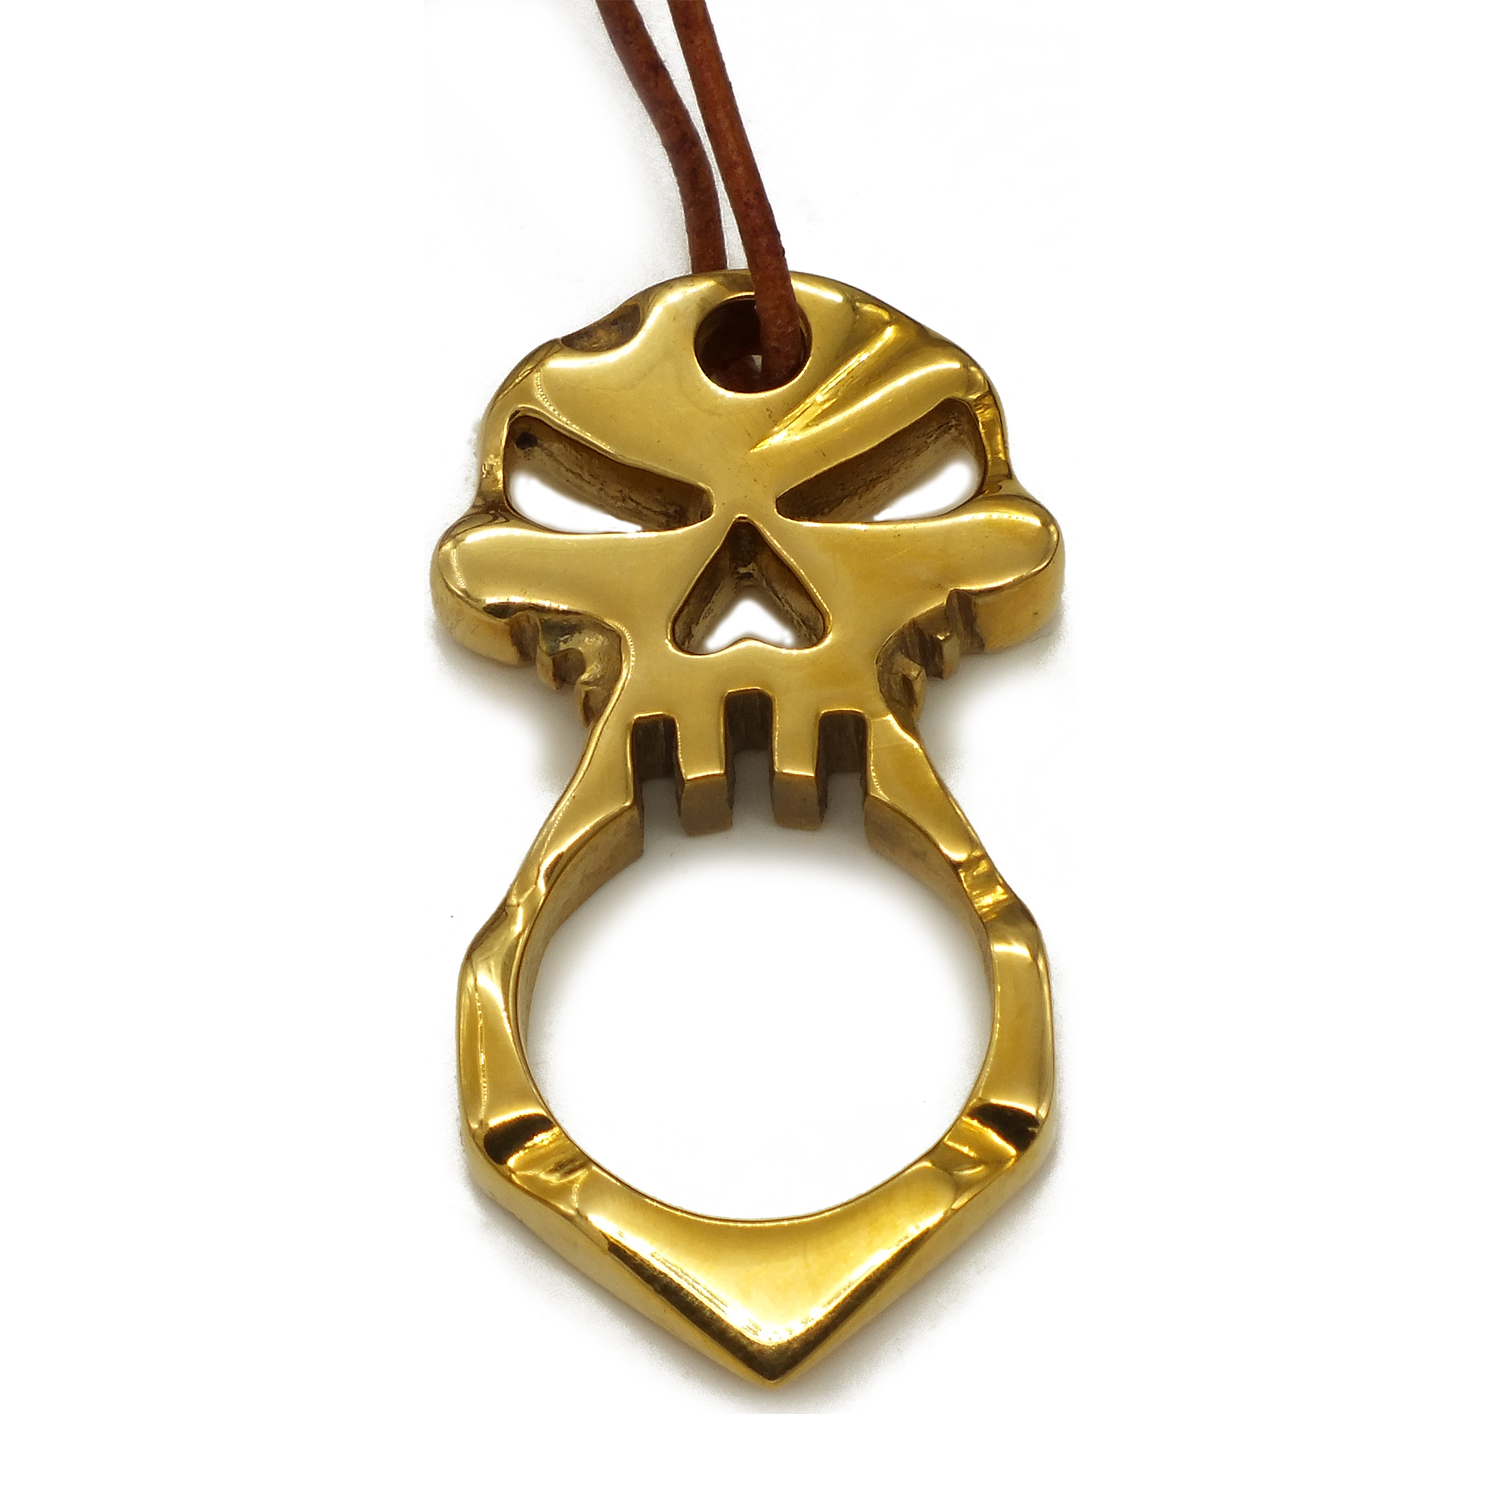 Pirate Skull Heavy Duty Solid Brass One Finger Knuckle